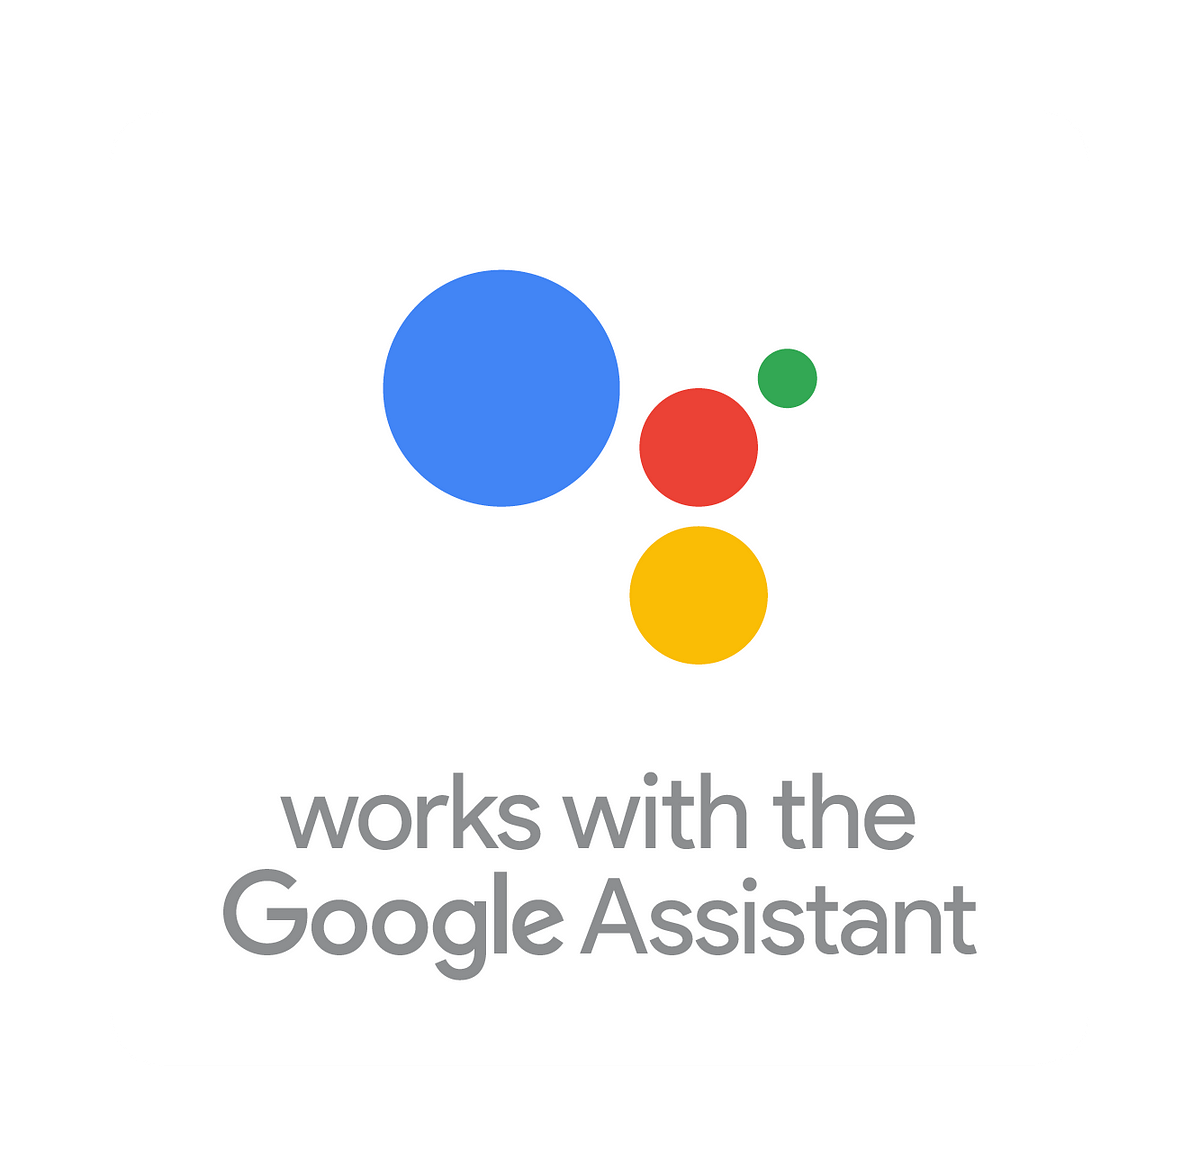 Works with, Google Assistant